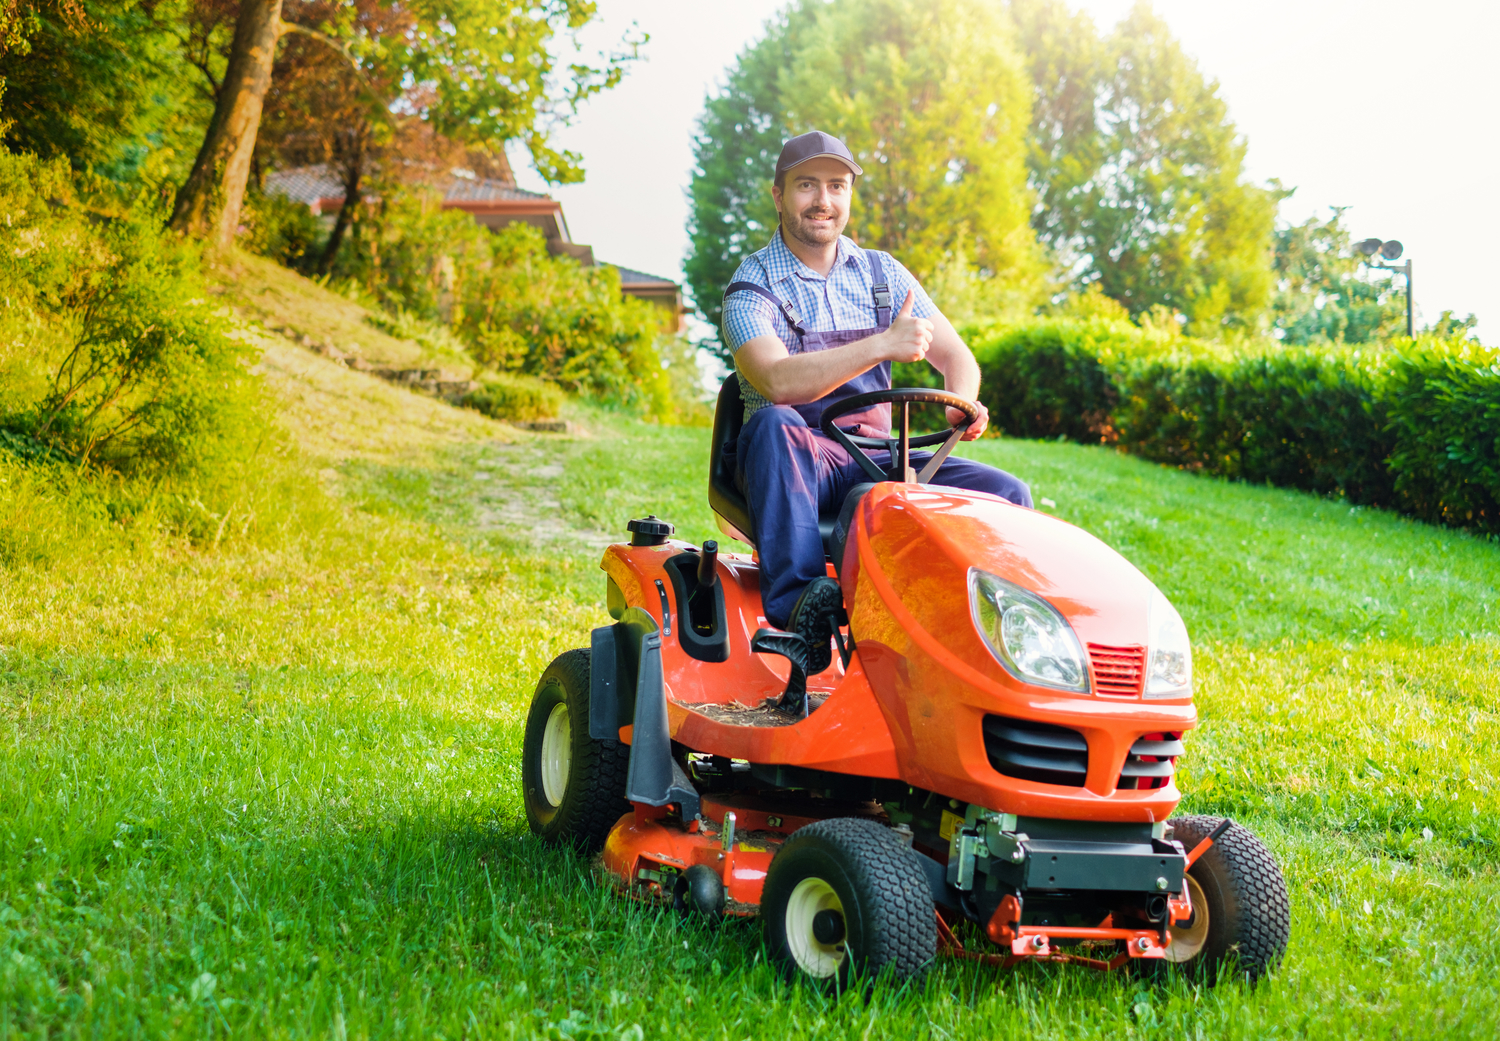 Faqs For Small Riding Lawn Mowers answersguide